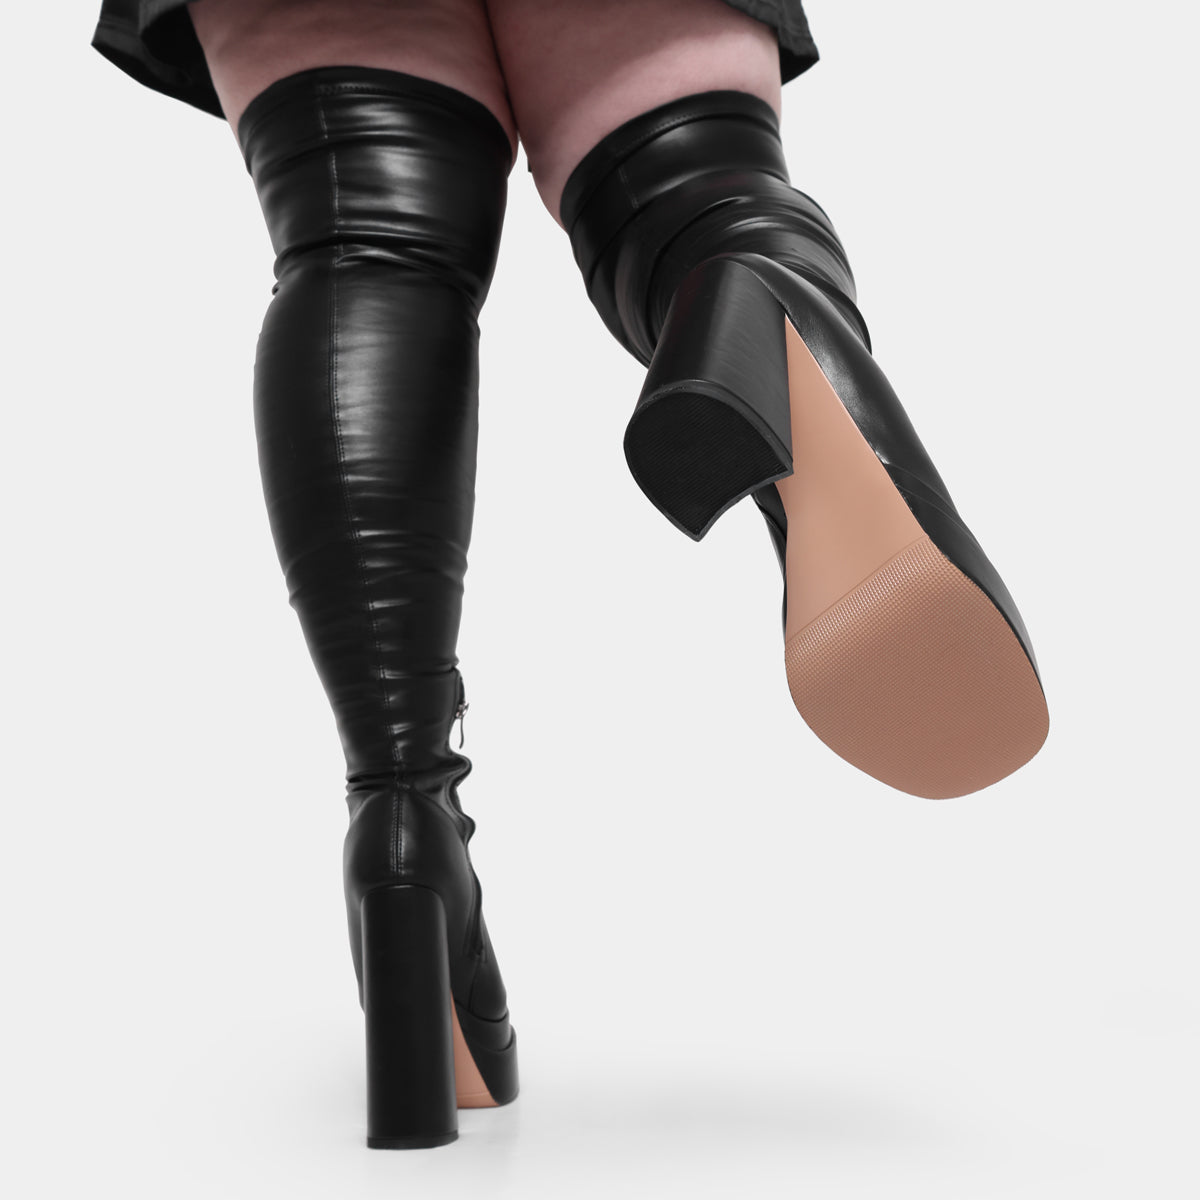 The Redemption Black Stretch Thigh High Boots - Long Boots - KOI Footwear - Black - Model Sole View